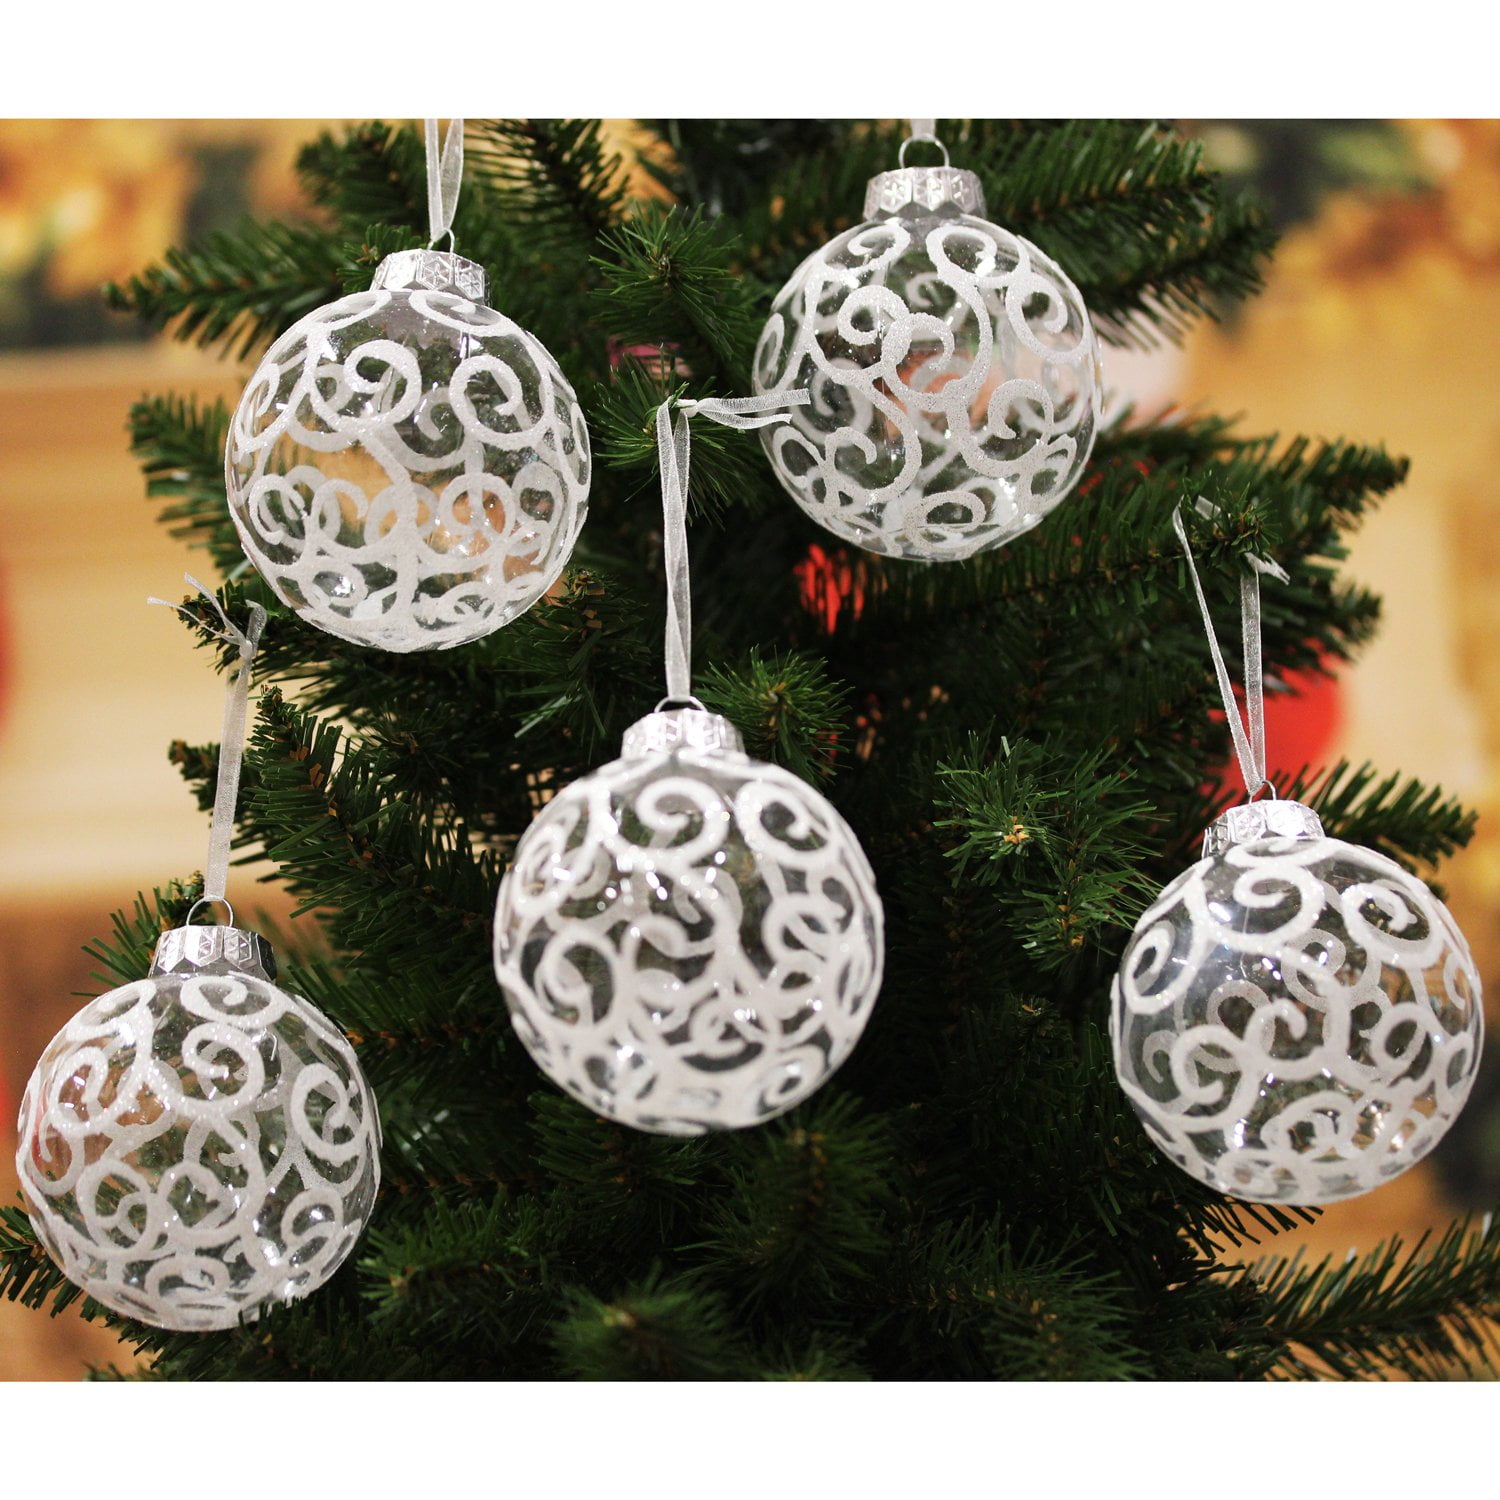 Sleetly 12pk White Christmas Ornaments for Tree Decorations - Shatterproof  Plastic 3.15 inch Holiday Xmas Balls, Clear Swirl